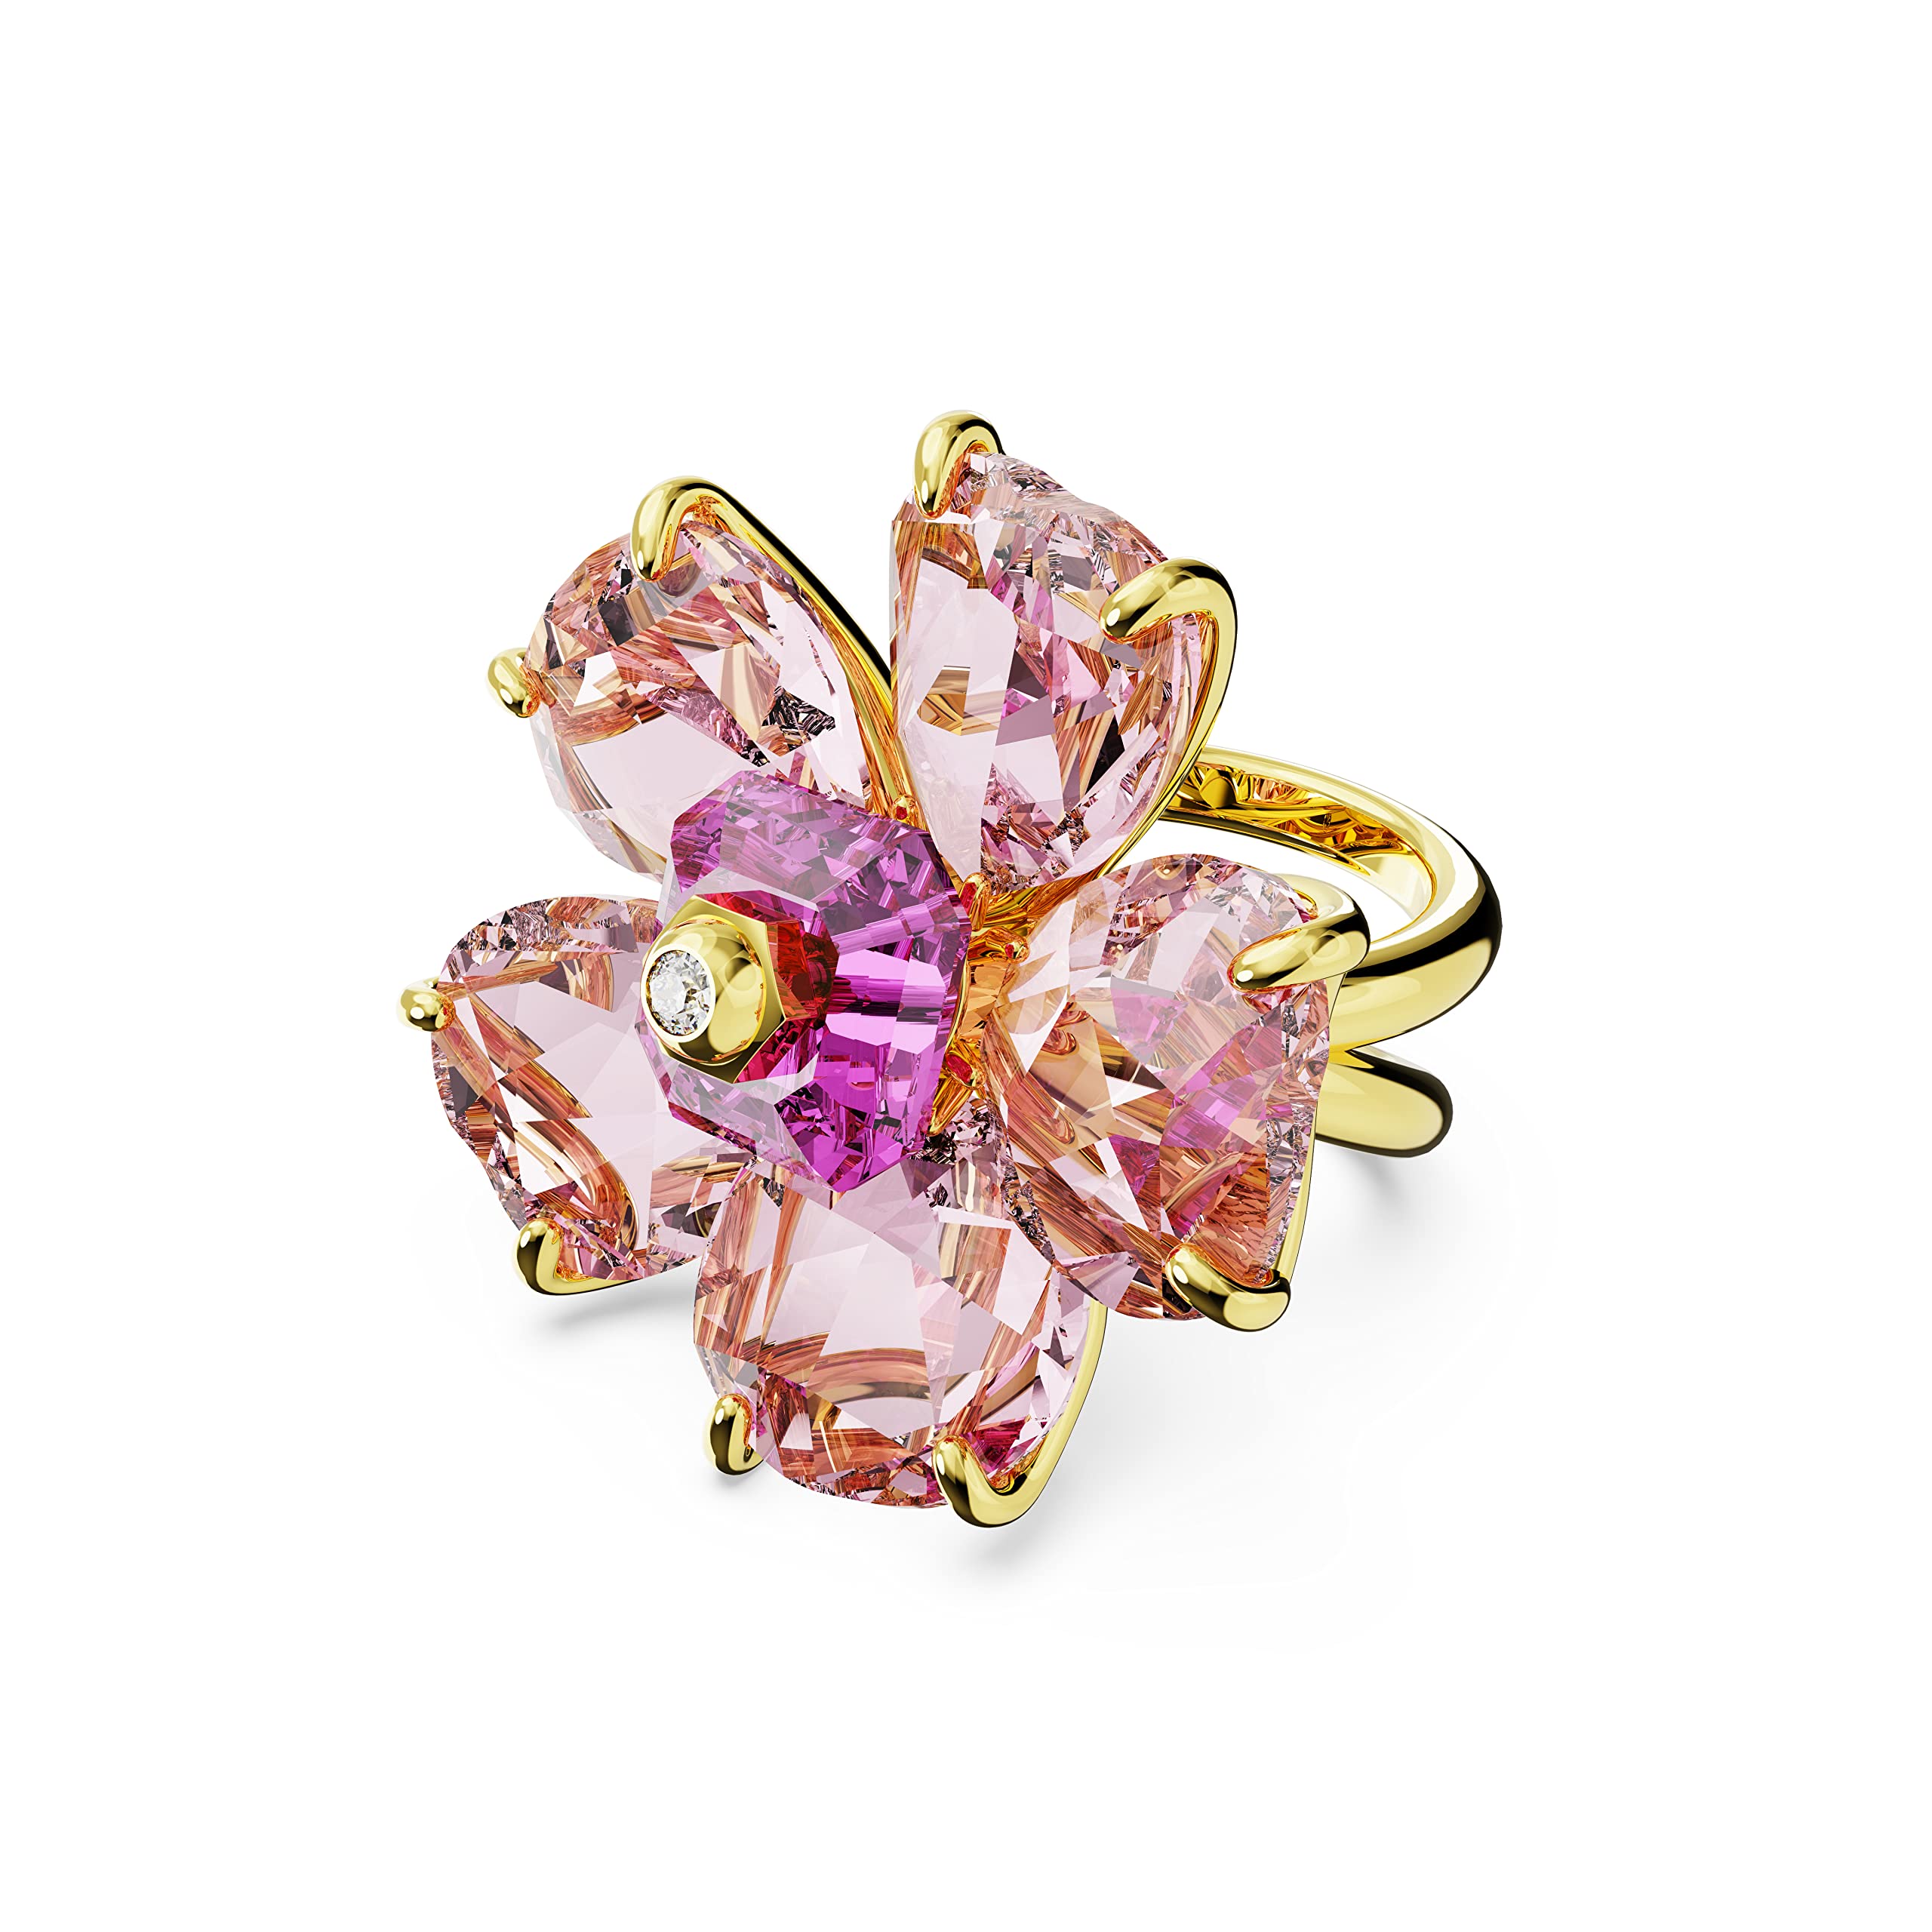 SWAROVSKI Florere Cocktail Ring, Flower Motif with Pink Crystals on a Gold-Tone Finished Double Band, Size 5, Part of the Florere Collection